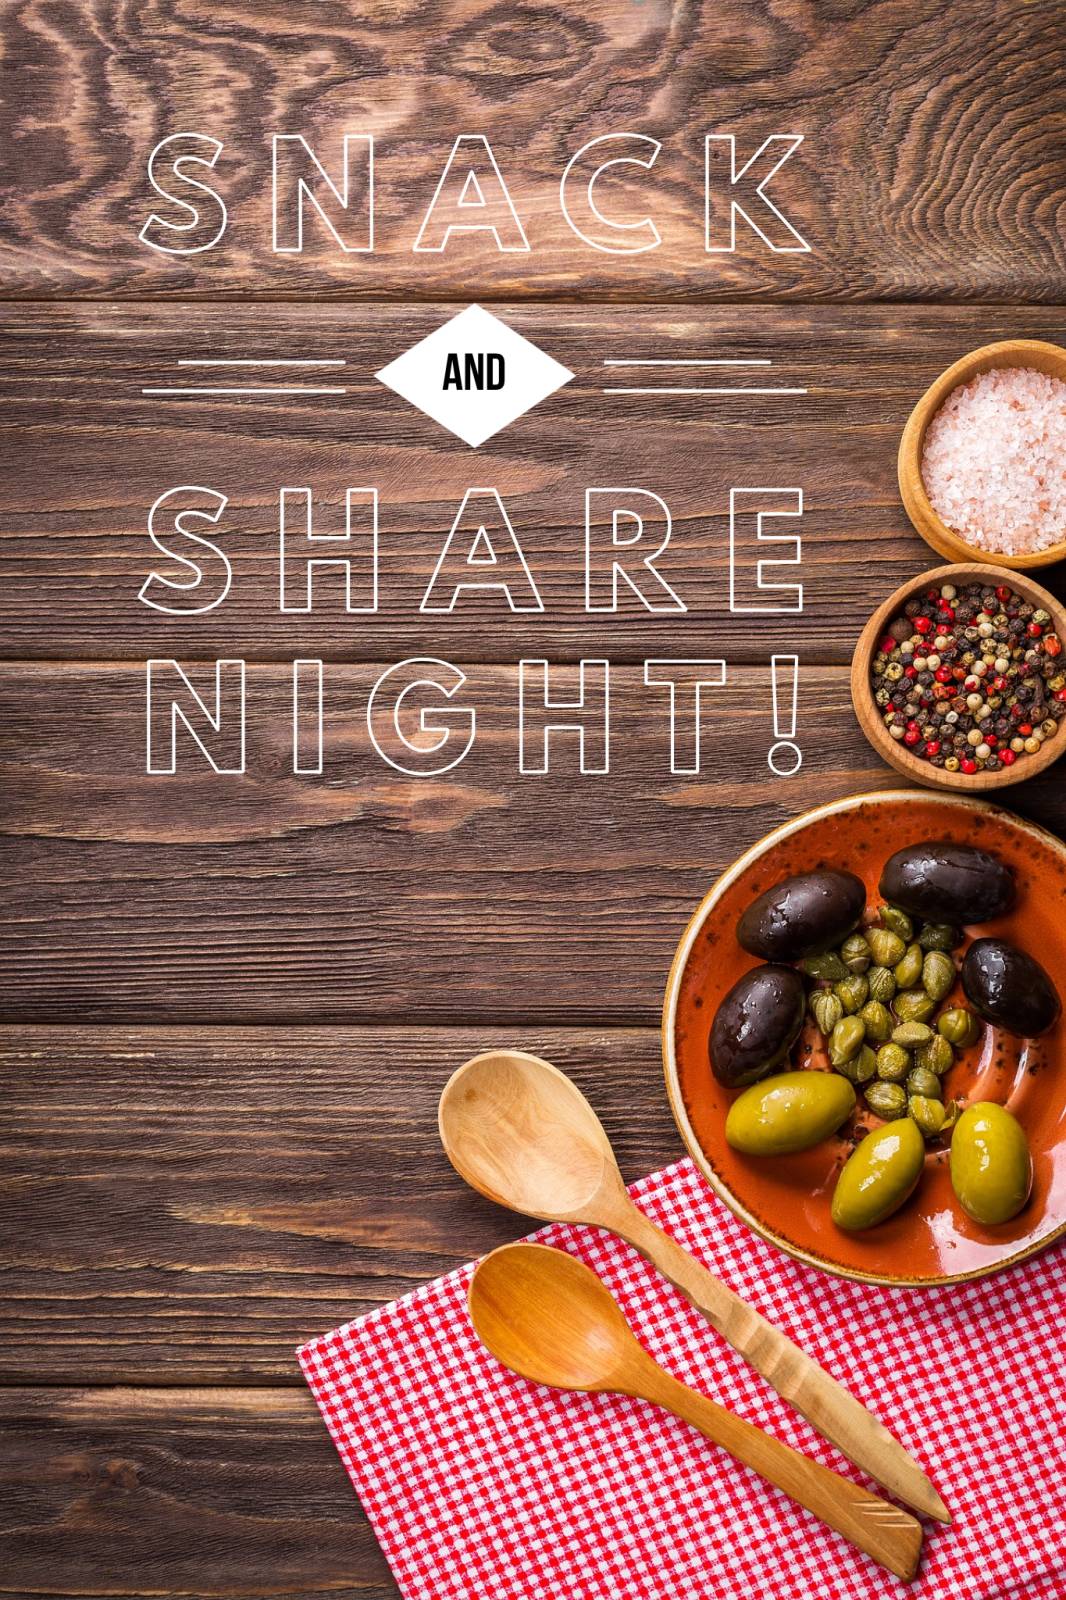 August Snack and Share night for Essential Oils!